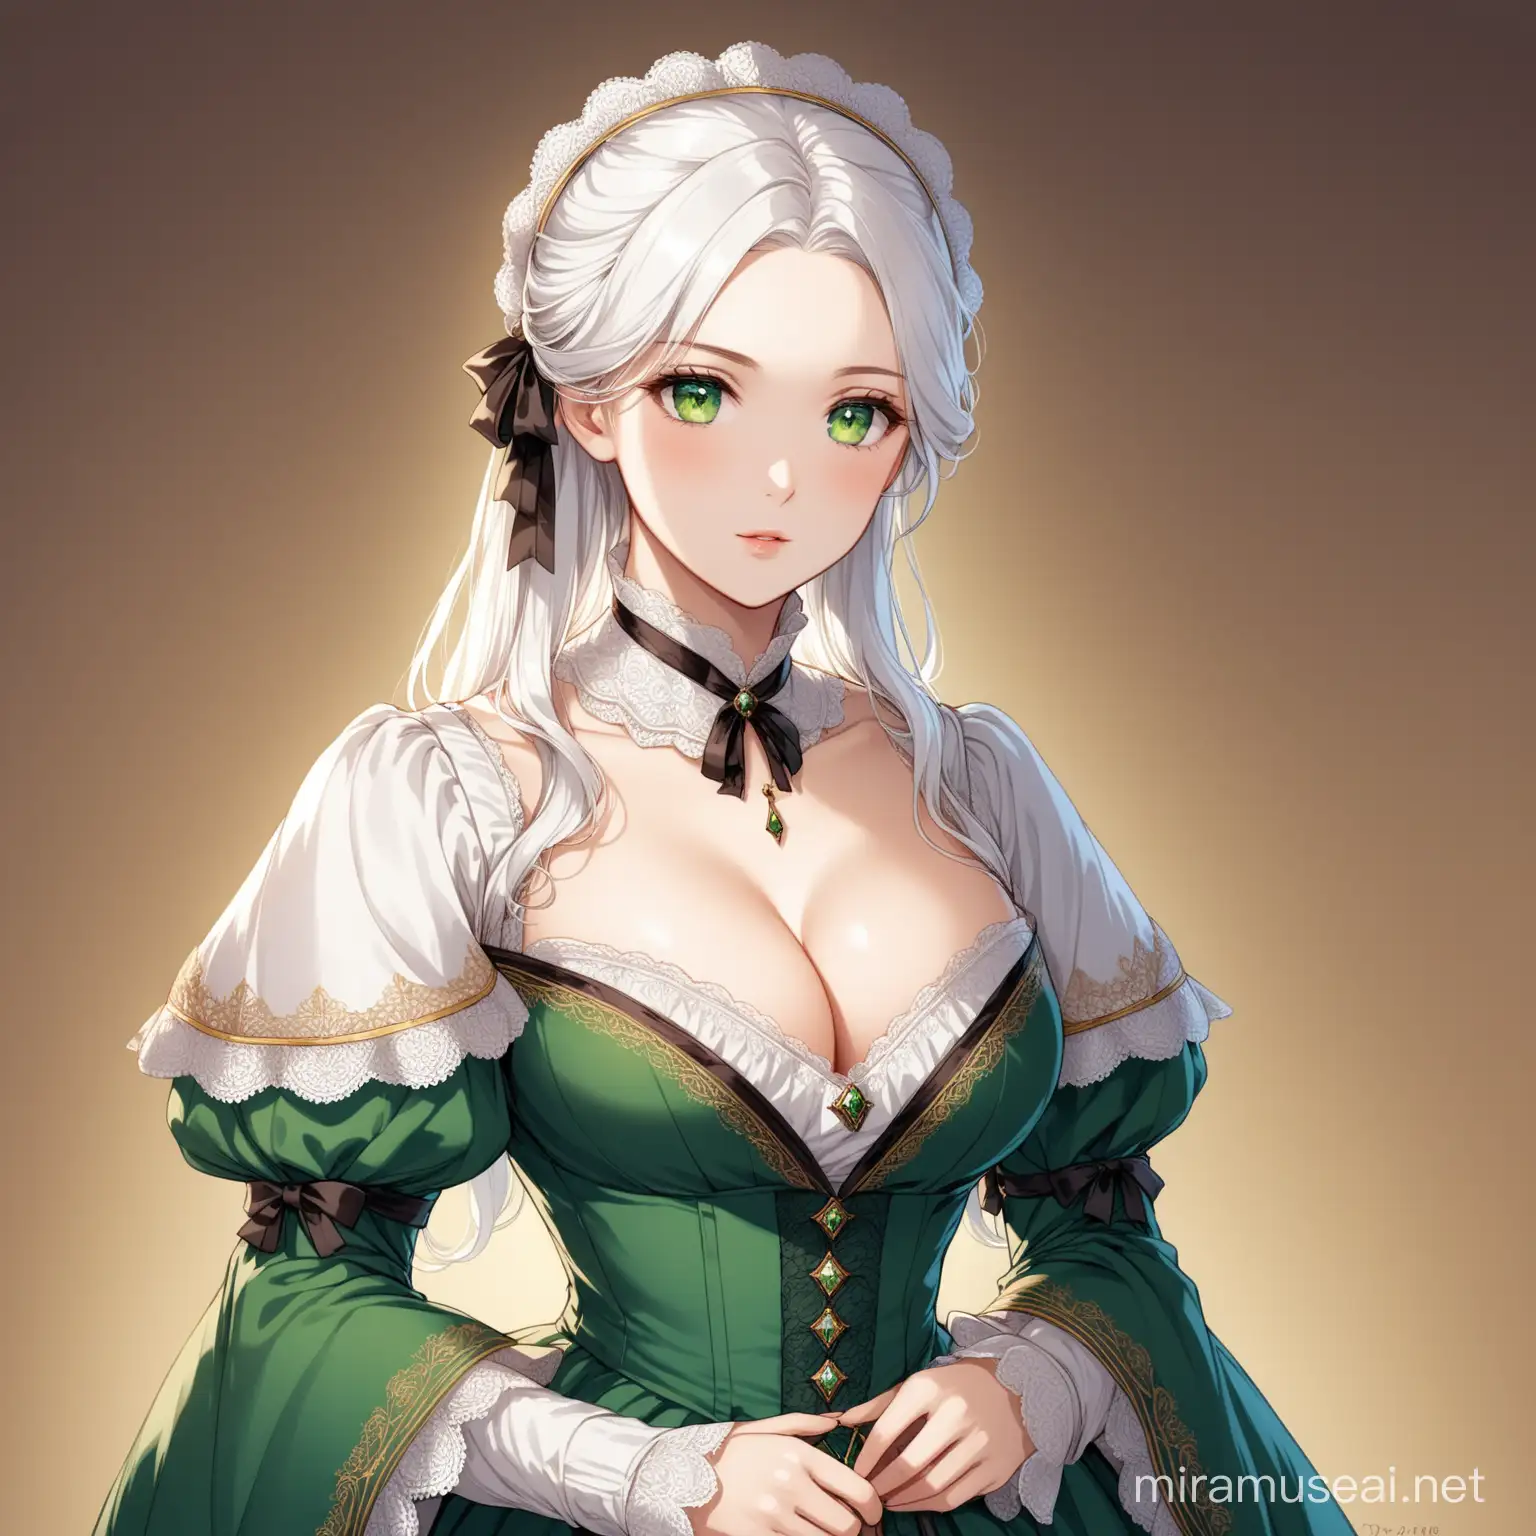 Elegant Victorian Noblewoman with White Hair and Green Eyes in a Luxurious Dress